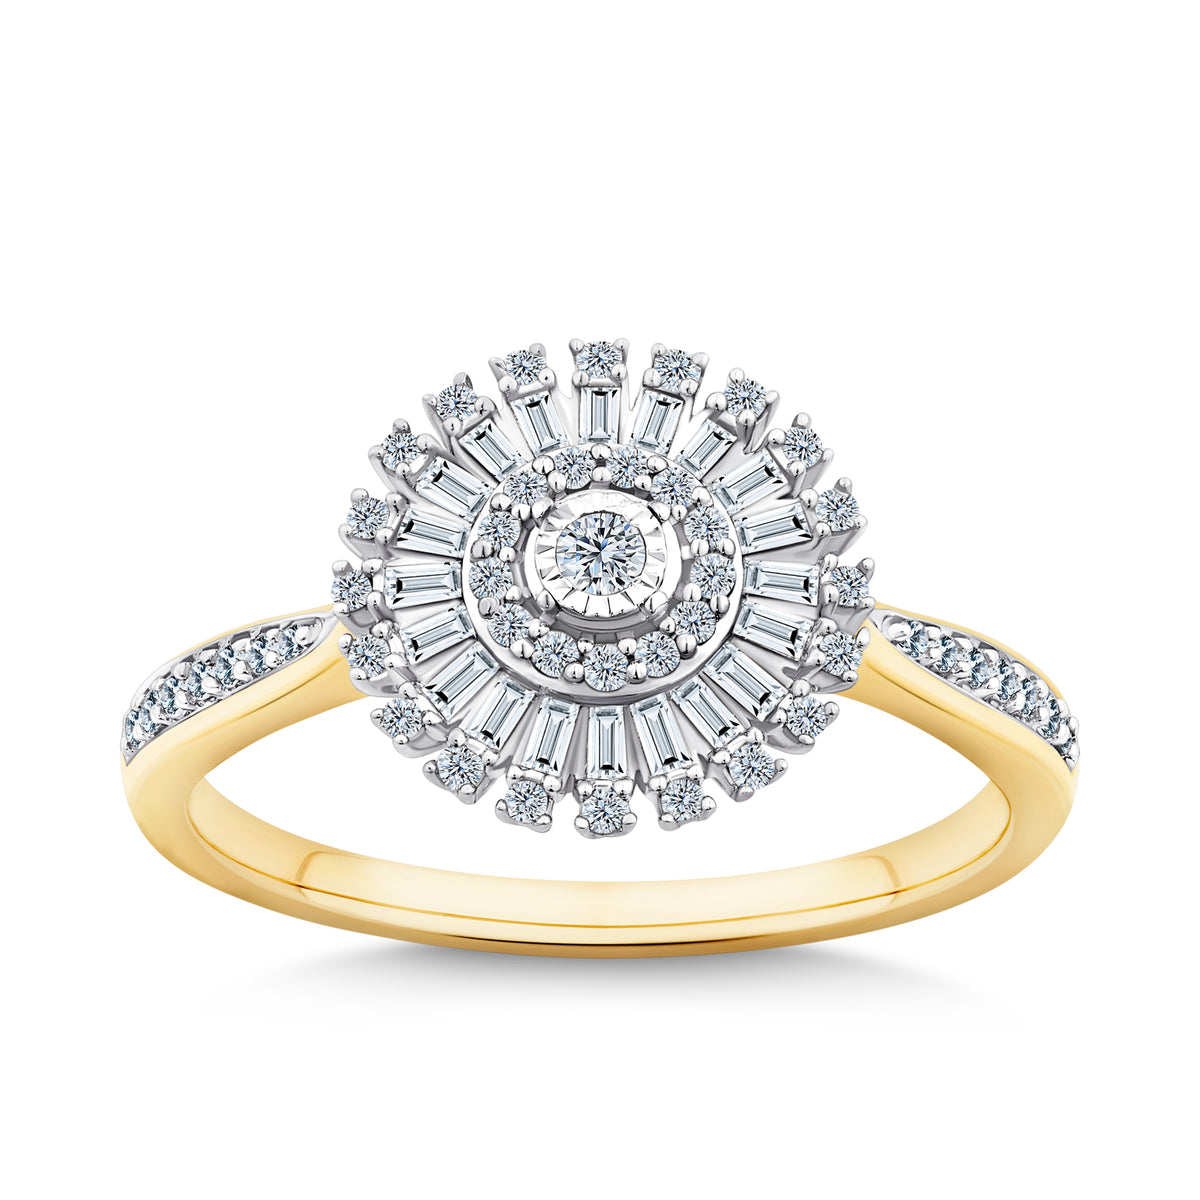 0.33ct TW Diamond Halo Ring in 9ct Yellow and White Gold